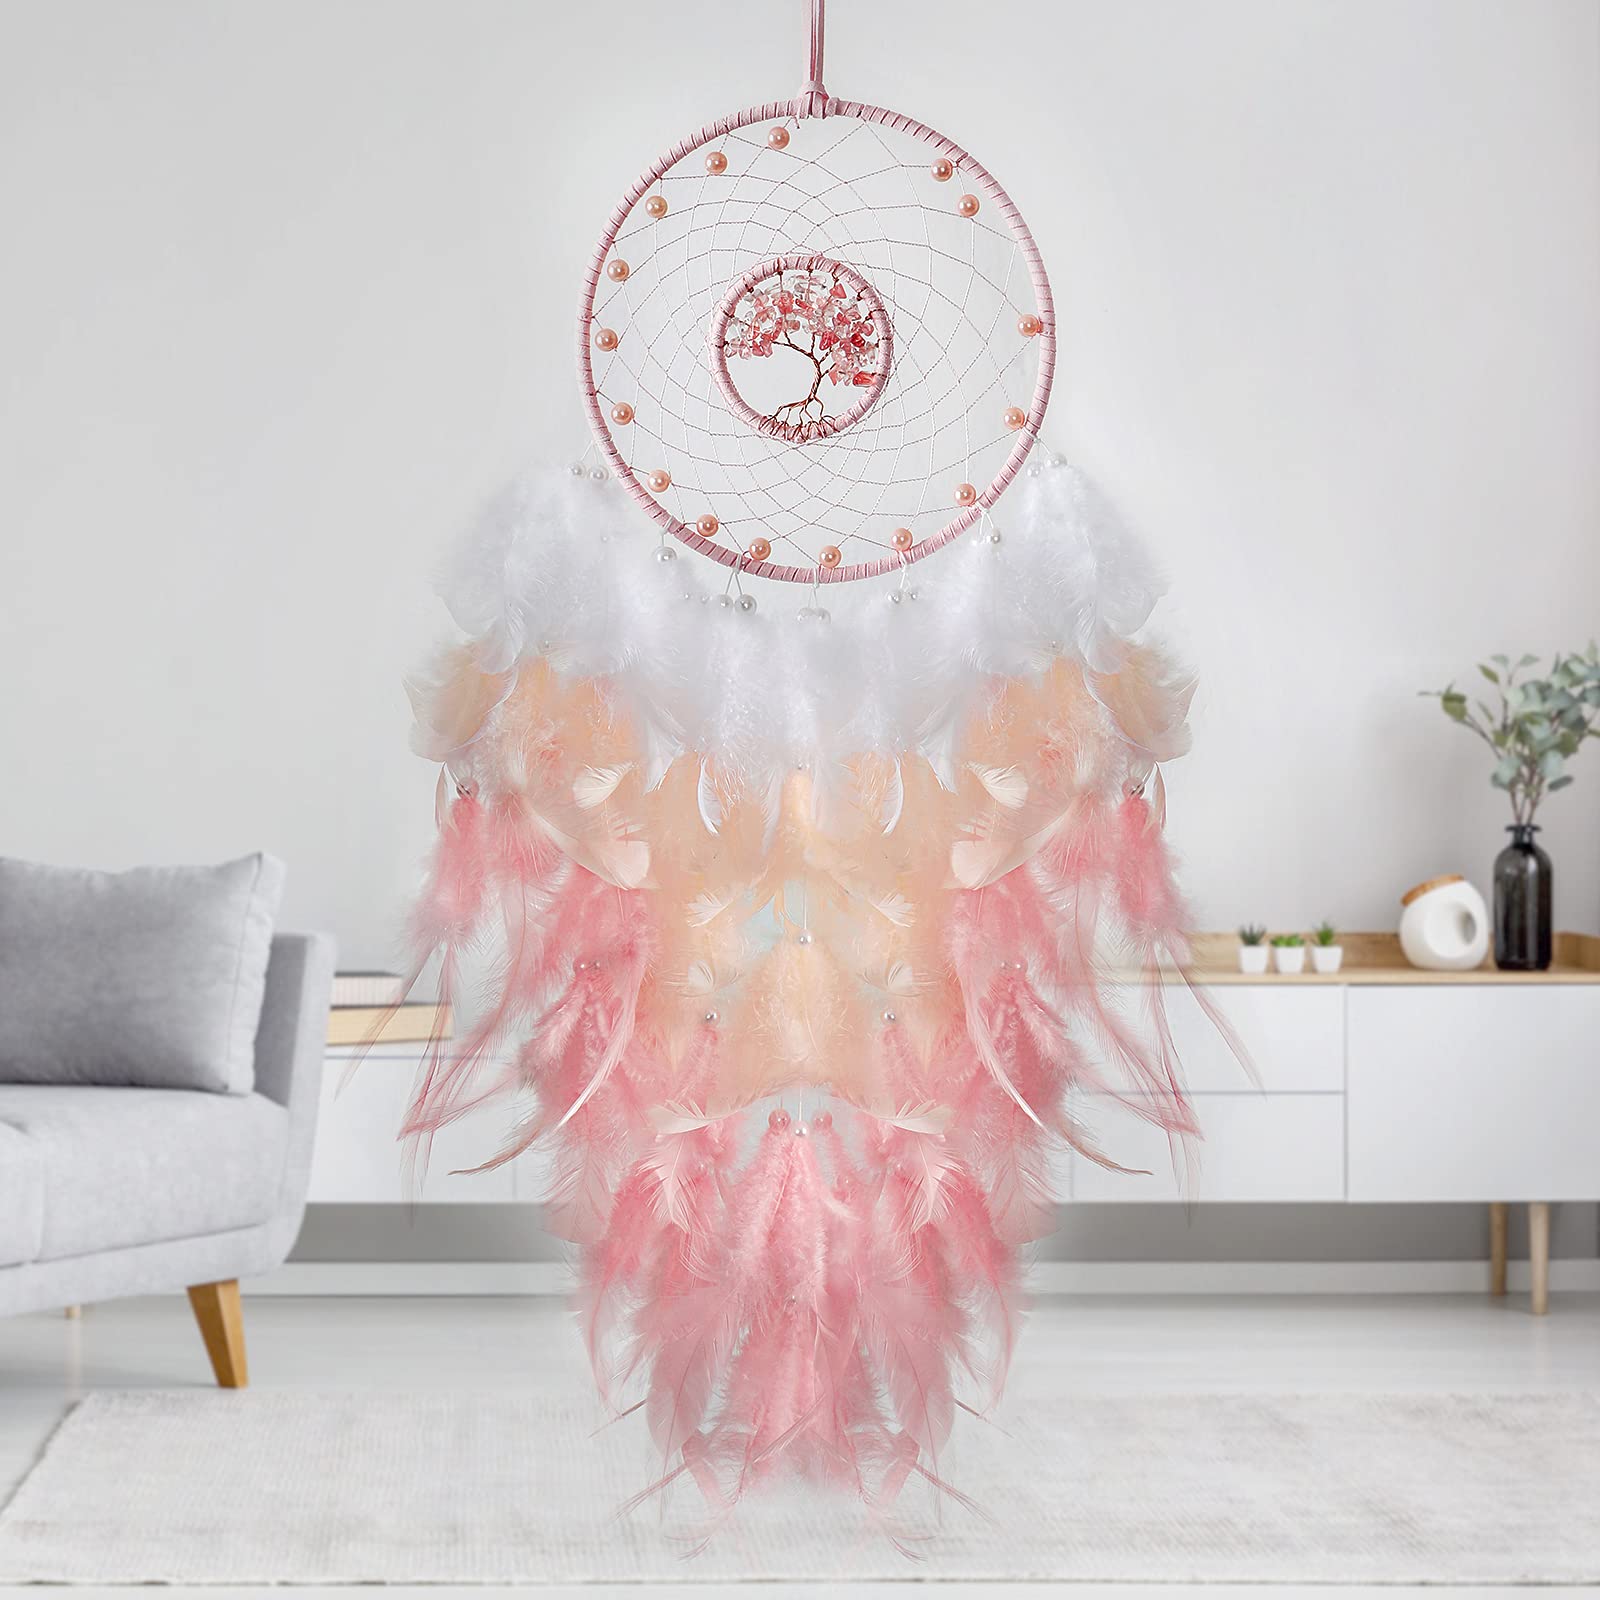 A soft and colorful dreamcatcher.